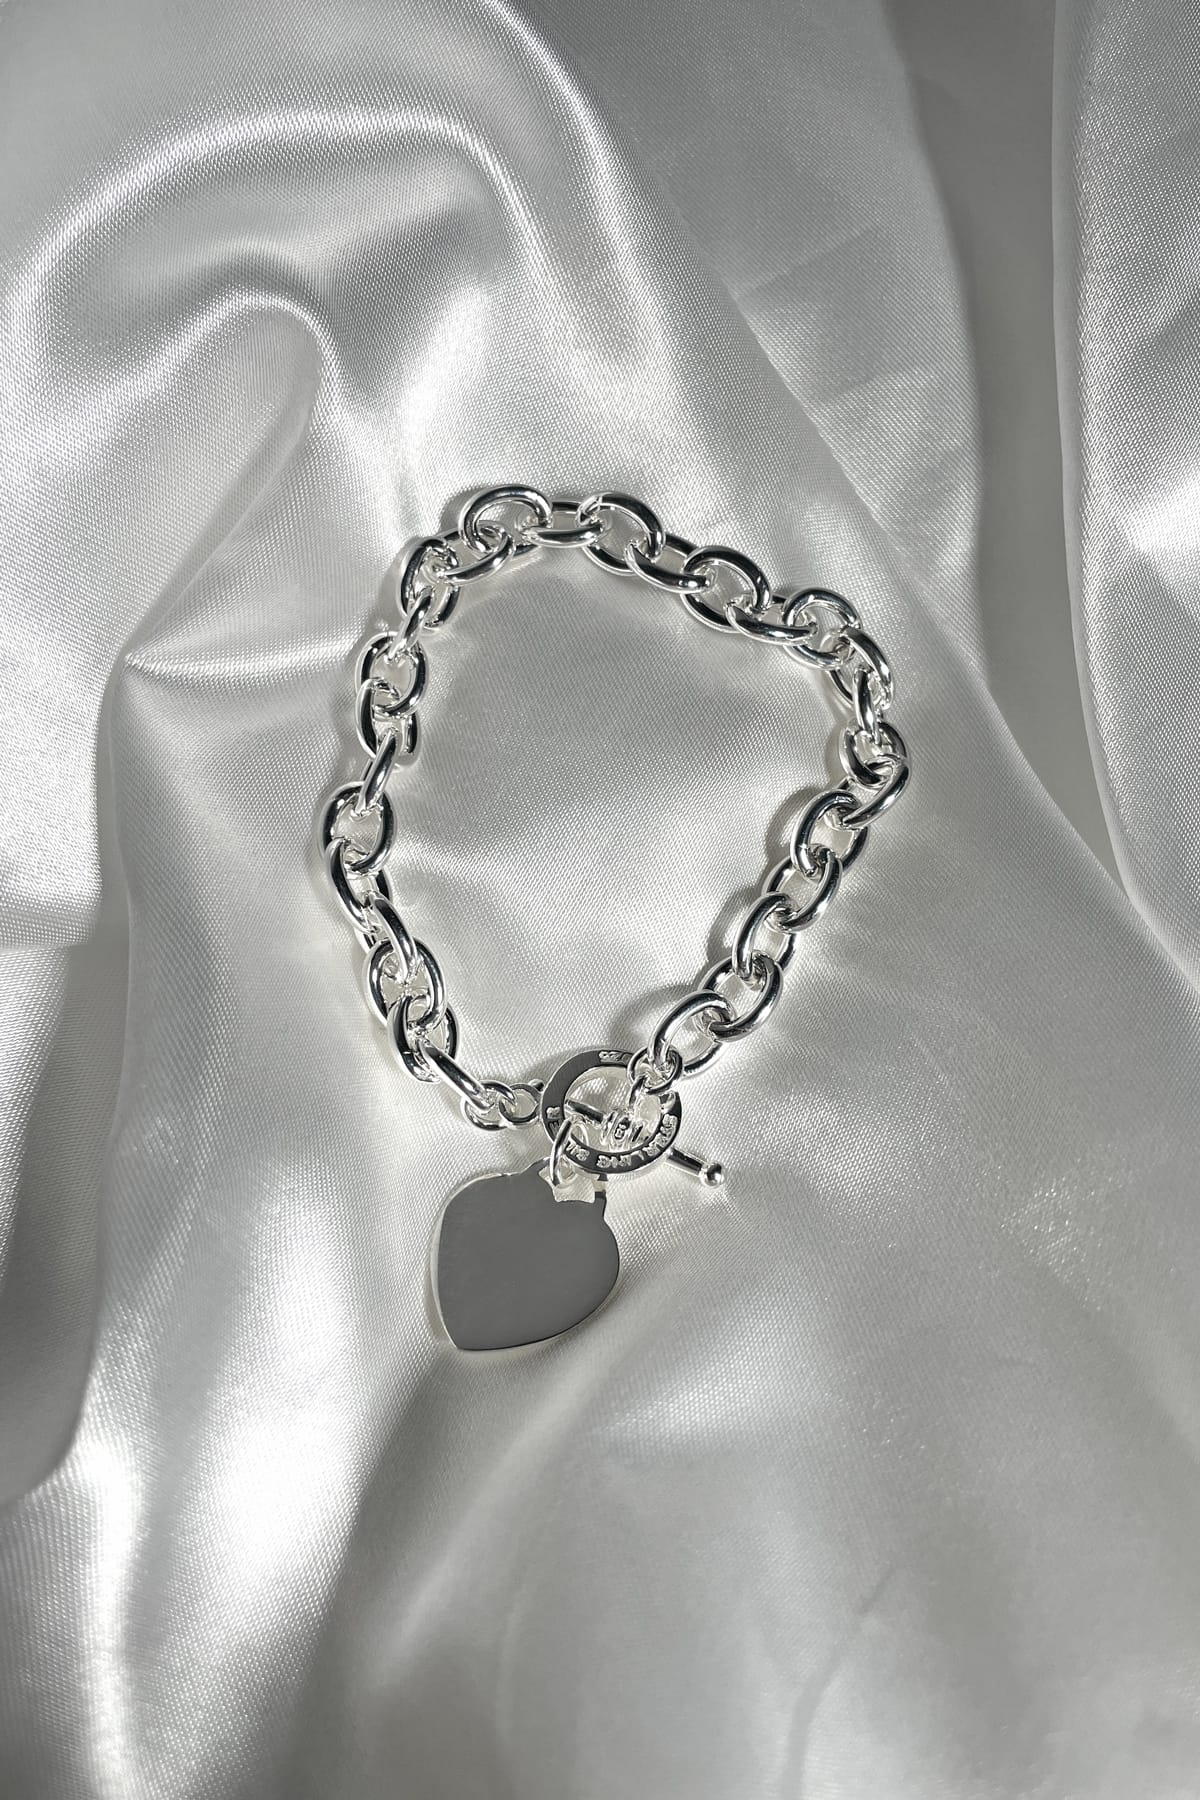 Sterling Silver Oval Cable Bracelet with Ring & Heart available at LeGassick Diamonds and Jewellery Gold Coast, Australia.